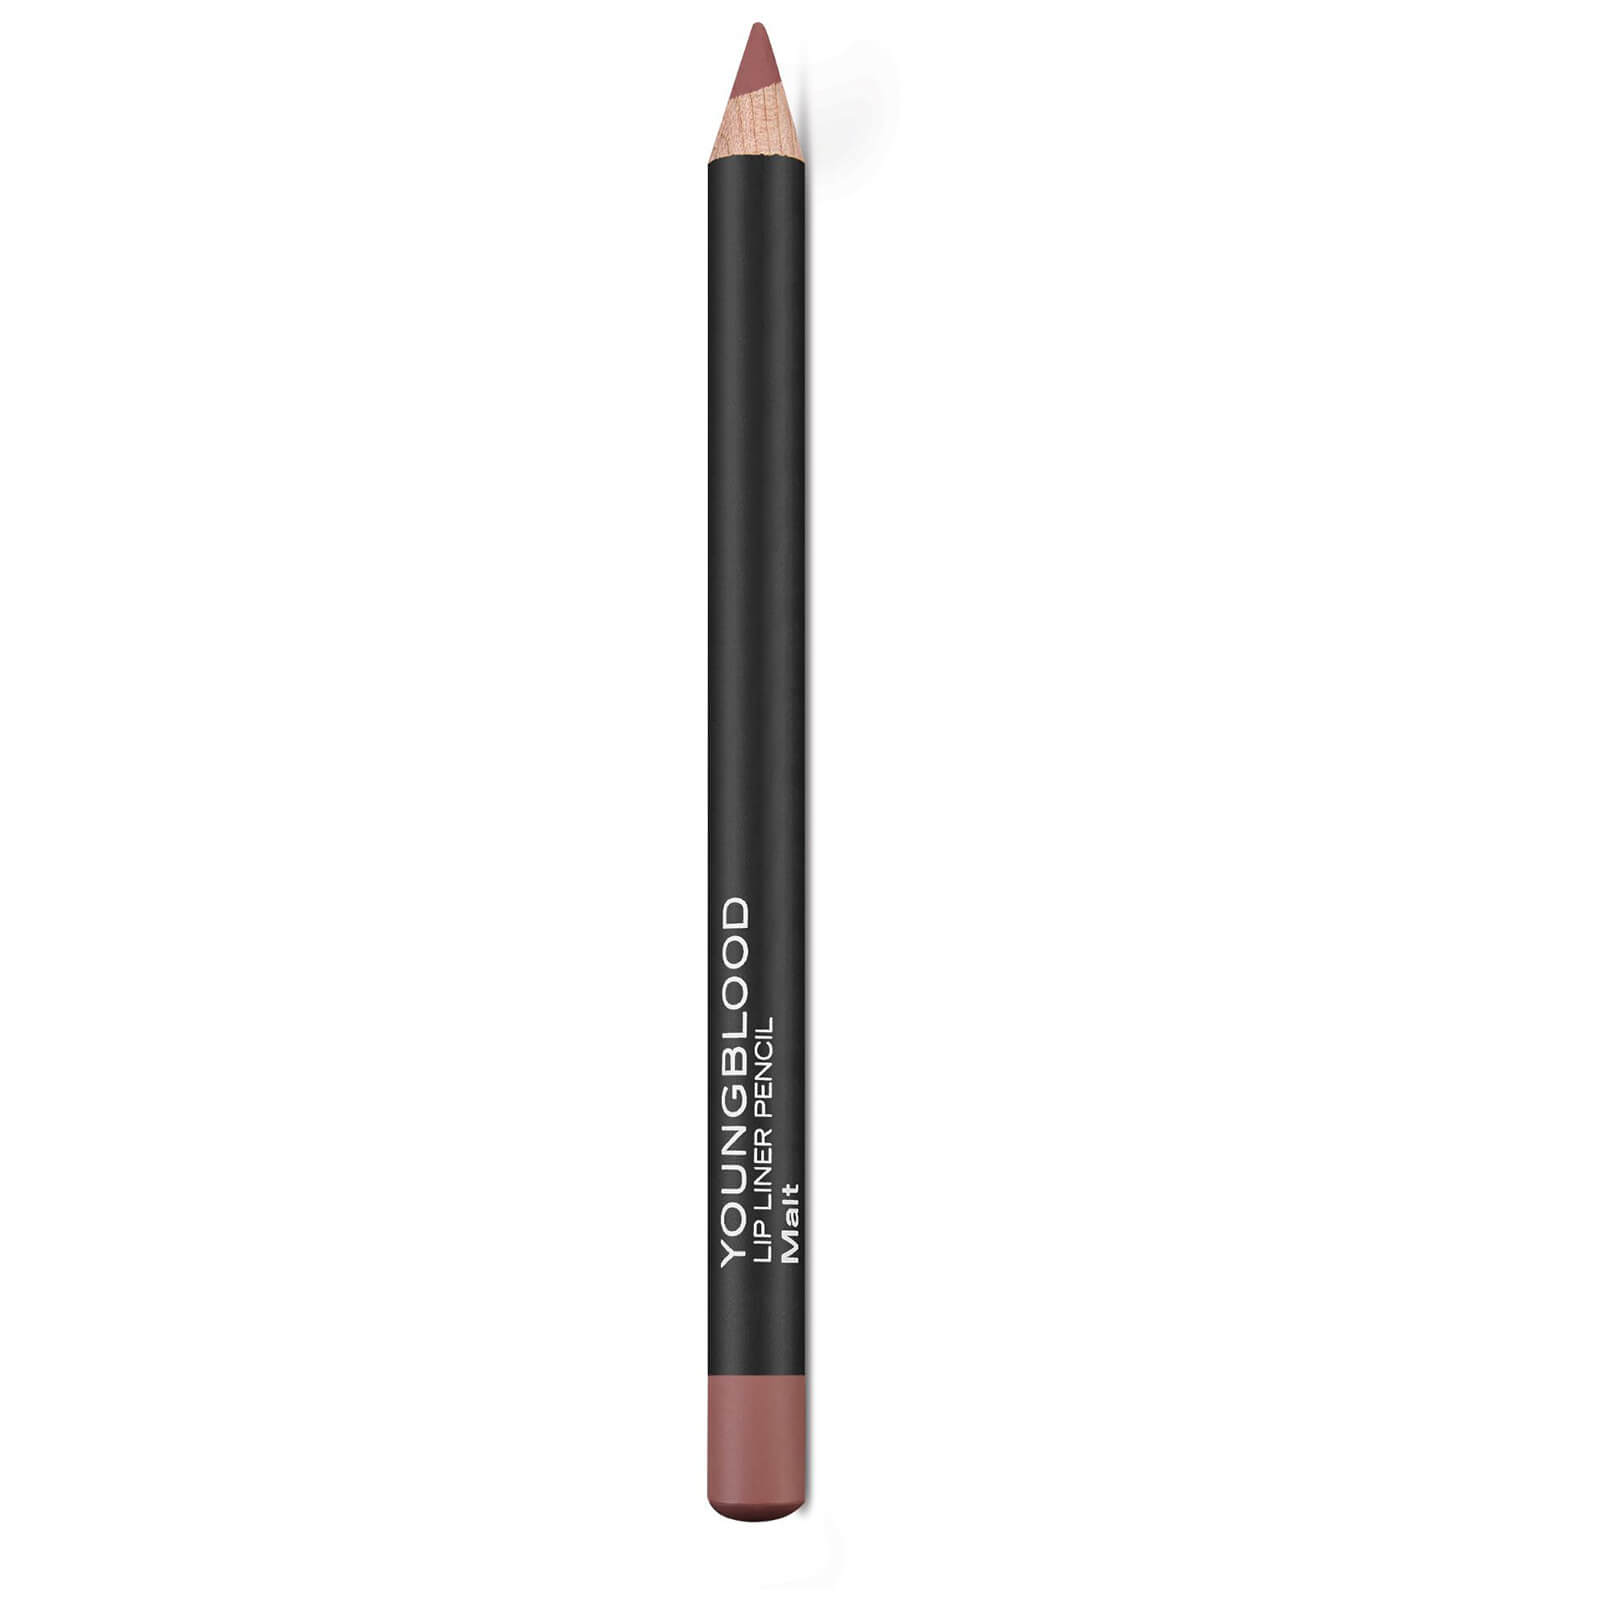 Youngblood Mineral Cosmetics Youngblood Lip Liner Pencil 1.1g (Various Shades) - Malt